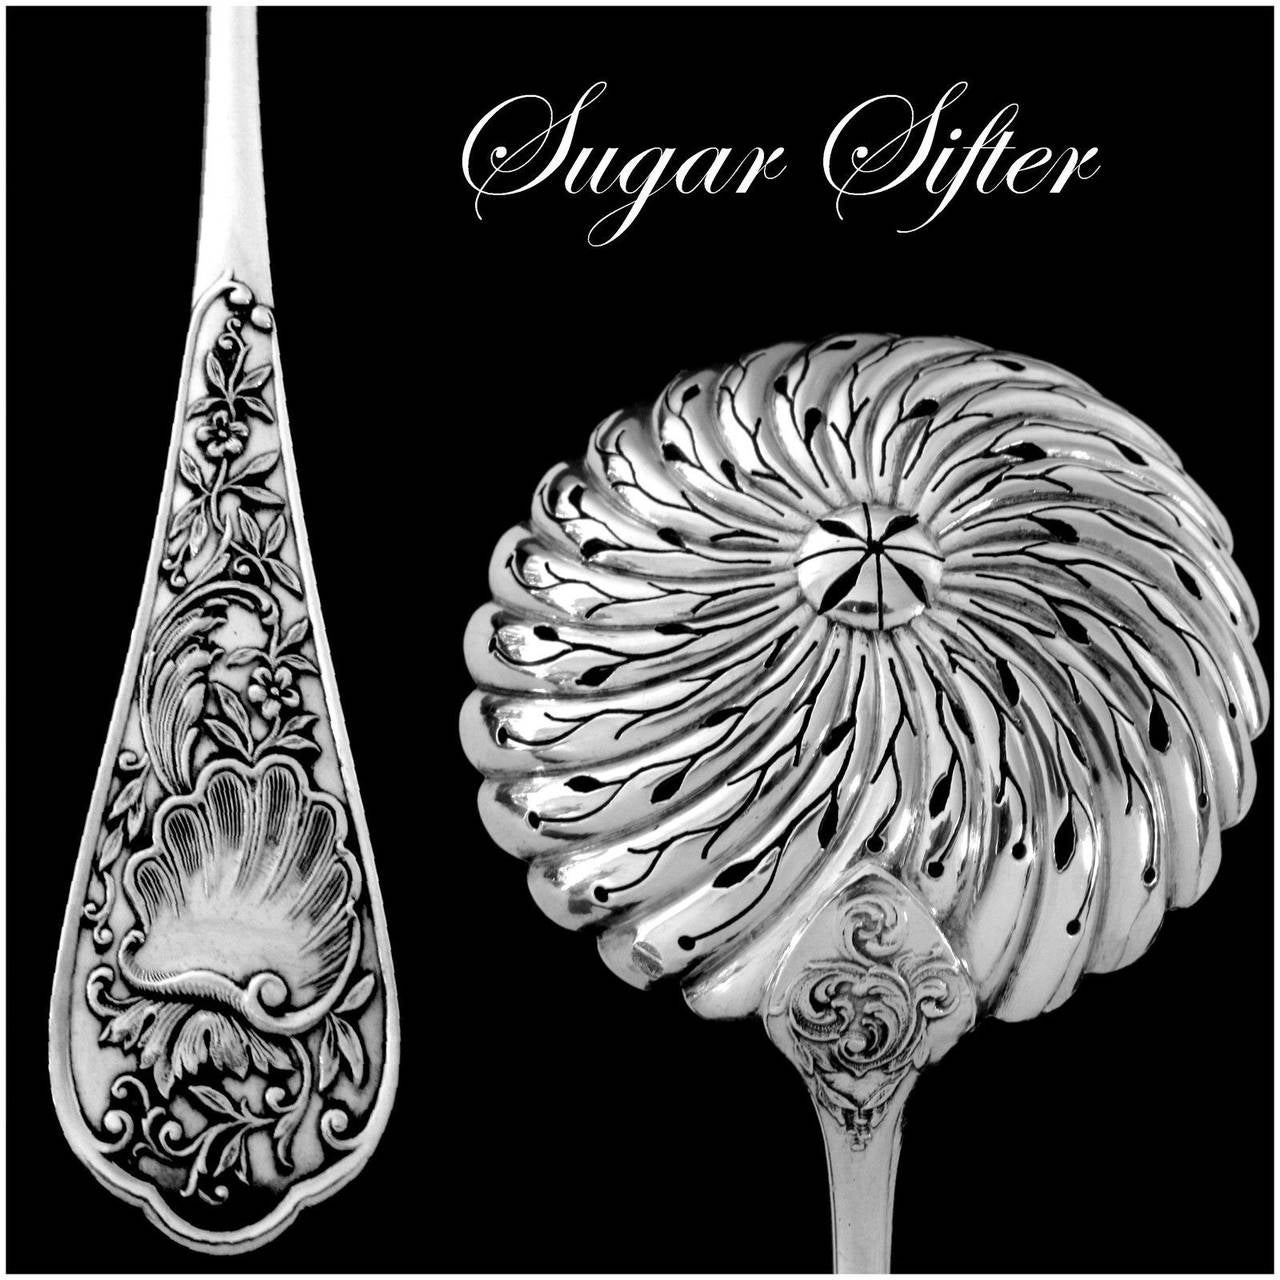 BOULENGER Fabulous French All Sterling Silver Sugar Sifter Spoon Rococo

Head of Minerve 1 st titre for 950/1000 French Sterling Silver guarantee.

A rare sugar sifter spoon of truly exceptional quality, for the richness of Rococo pattern. No